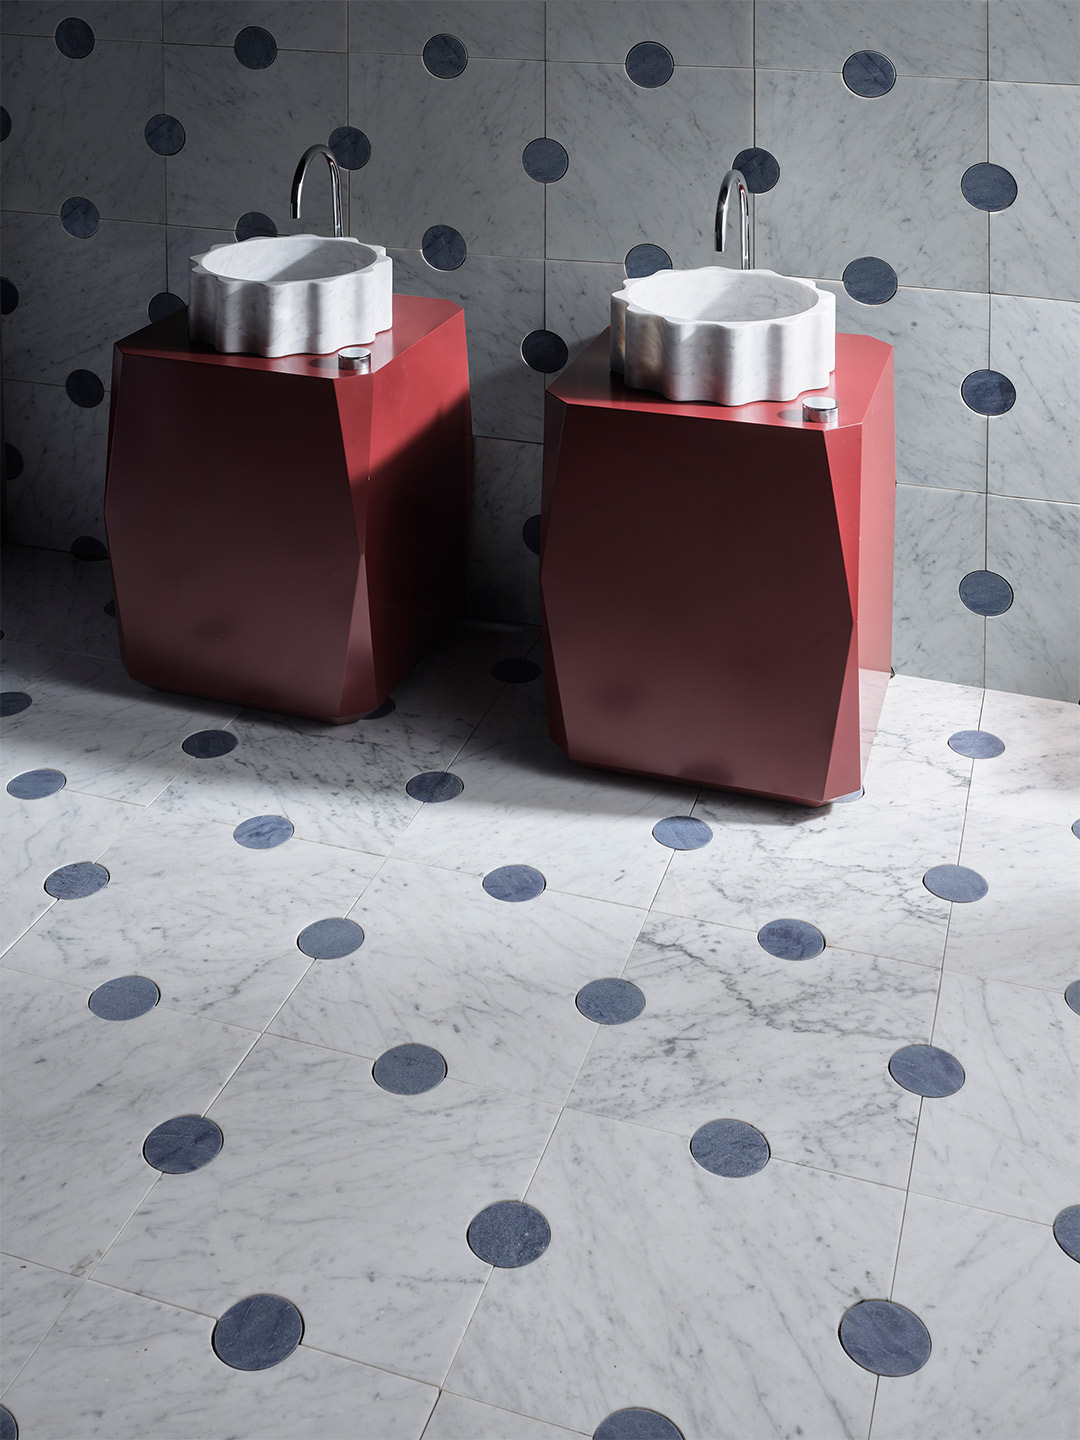 Largo collection of stone basins and tiles by Greg Natale for Teranova